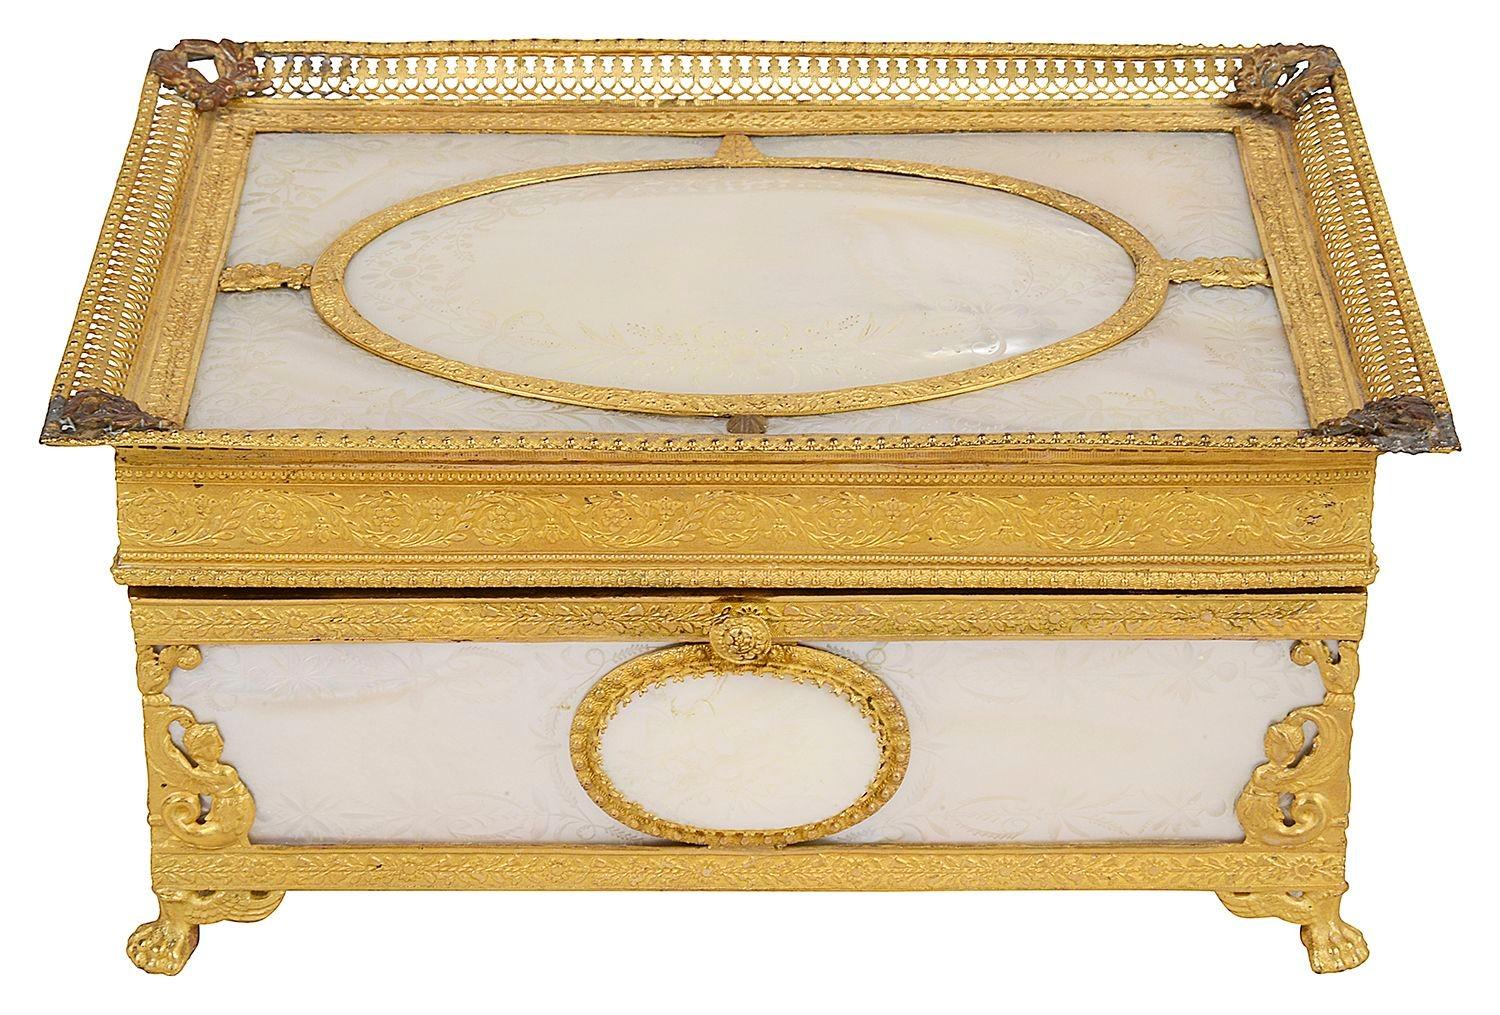 A fine quality 19th century French Palais Royal mother of pearl and ormolu six-bottle perfume casket.
